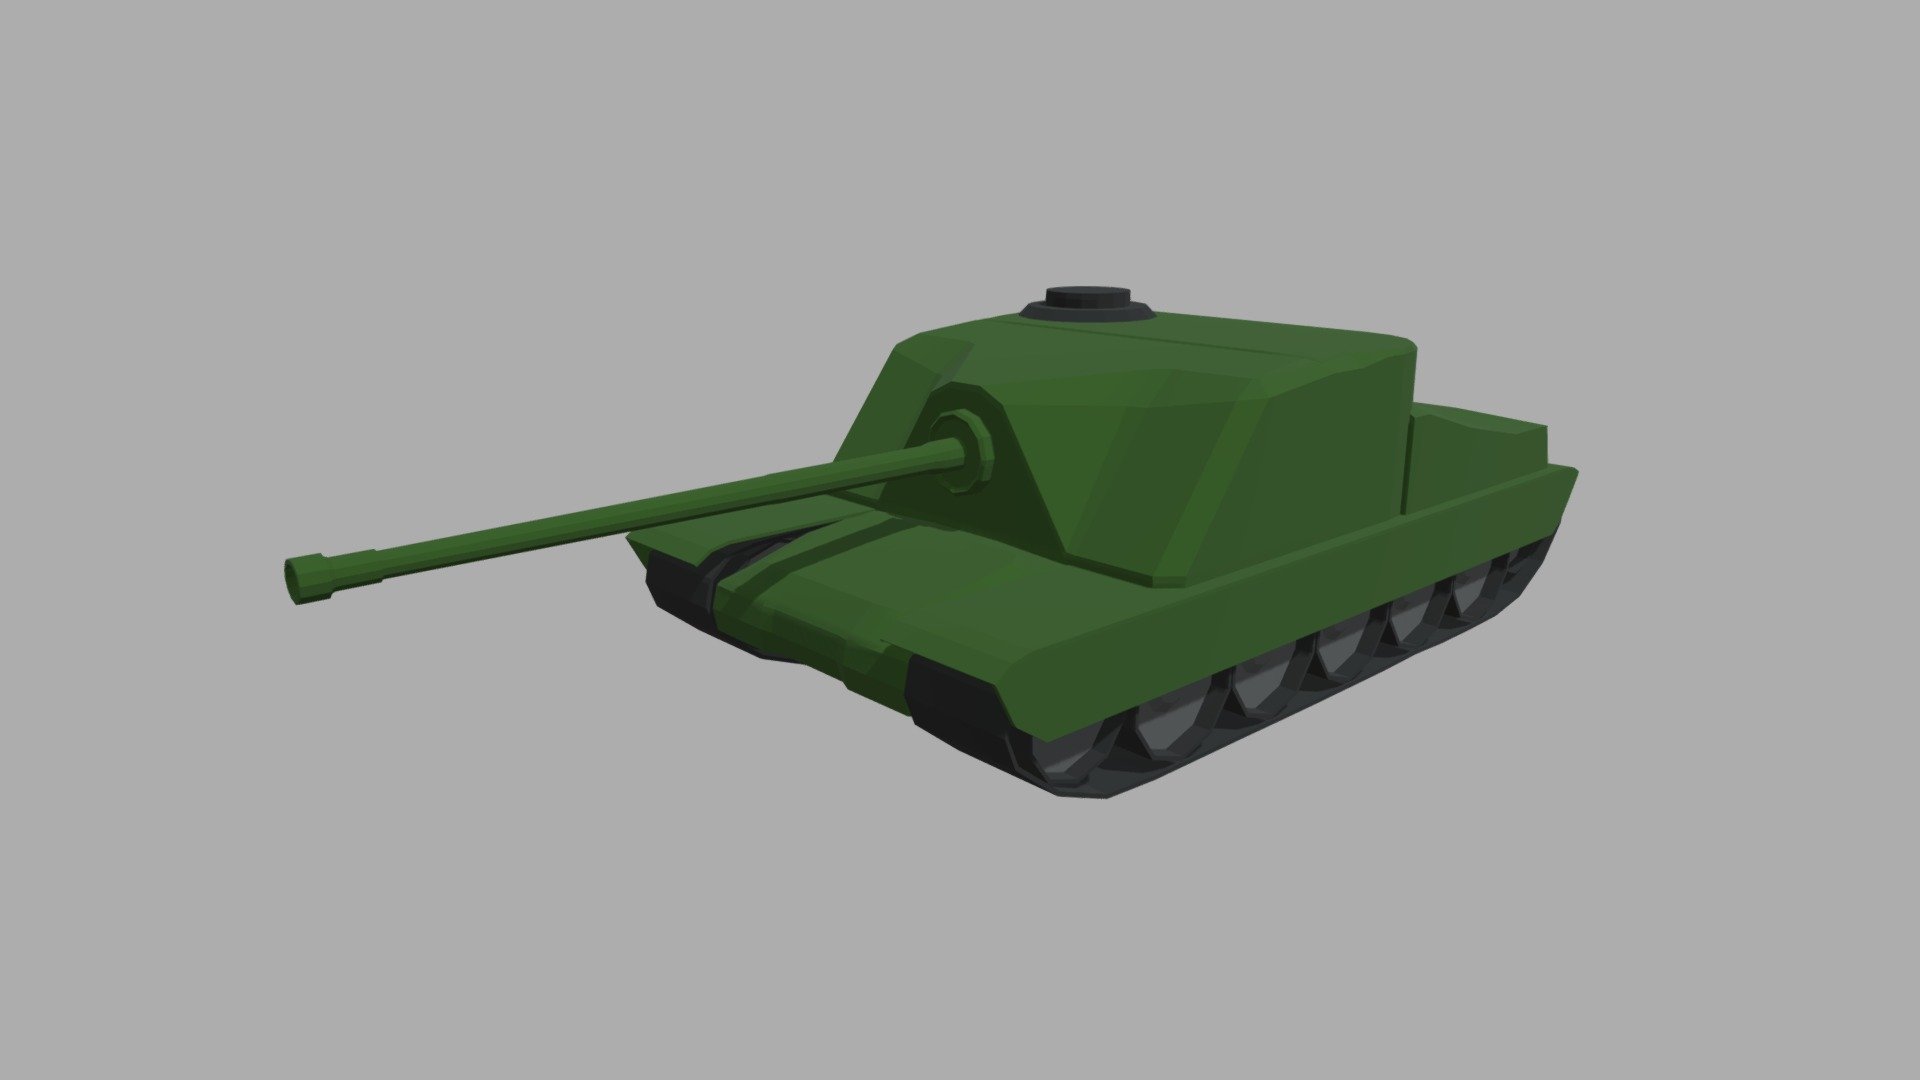 This model contains a Low Poly Tank 01 based on a tank which i modeled in Maya 2018. This model is perfect to create a new great scene with different low poly cars or low poly items.

There is an automatic UV textured in Substance Painter, I will add the Substance Painter file.

Tris: 5904 // Verts: 2988

The model is ready as one unique part and ready for being a great CGI model and also a 3D printable model, i will add the STL model, tested for 3D printing in Ultimaker Cura. I uploaded the model in .mb, ,blend, .stl, .obj and .fbx.

If you need any kind of help contact me, i will help you with everything i can. If you like the model please give me some feedback, I would appreciate it.

Don’t doubt on contacting me, i would be very happy to help. If you experience any kind of difficulties, be sure to contact me and i will help you. Sincerely Yours, ViperJr3D - Low Poly Tank 01 - Buy Royalty Free 3D model by ViperJr3D 3d model